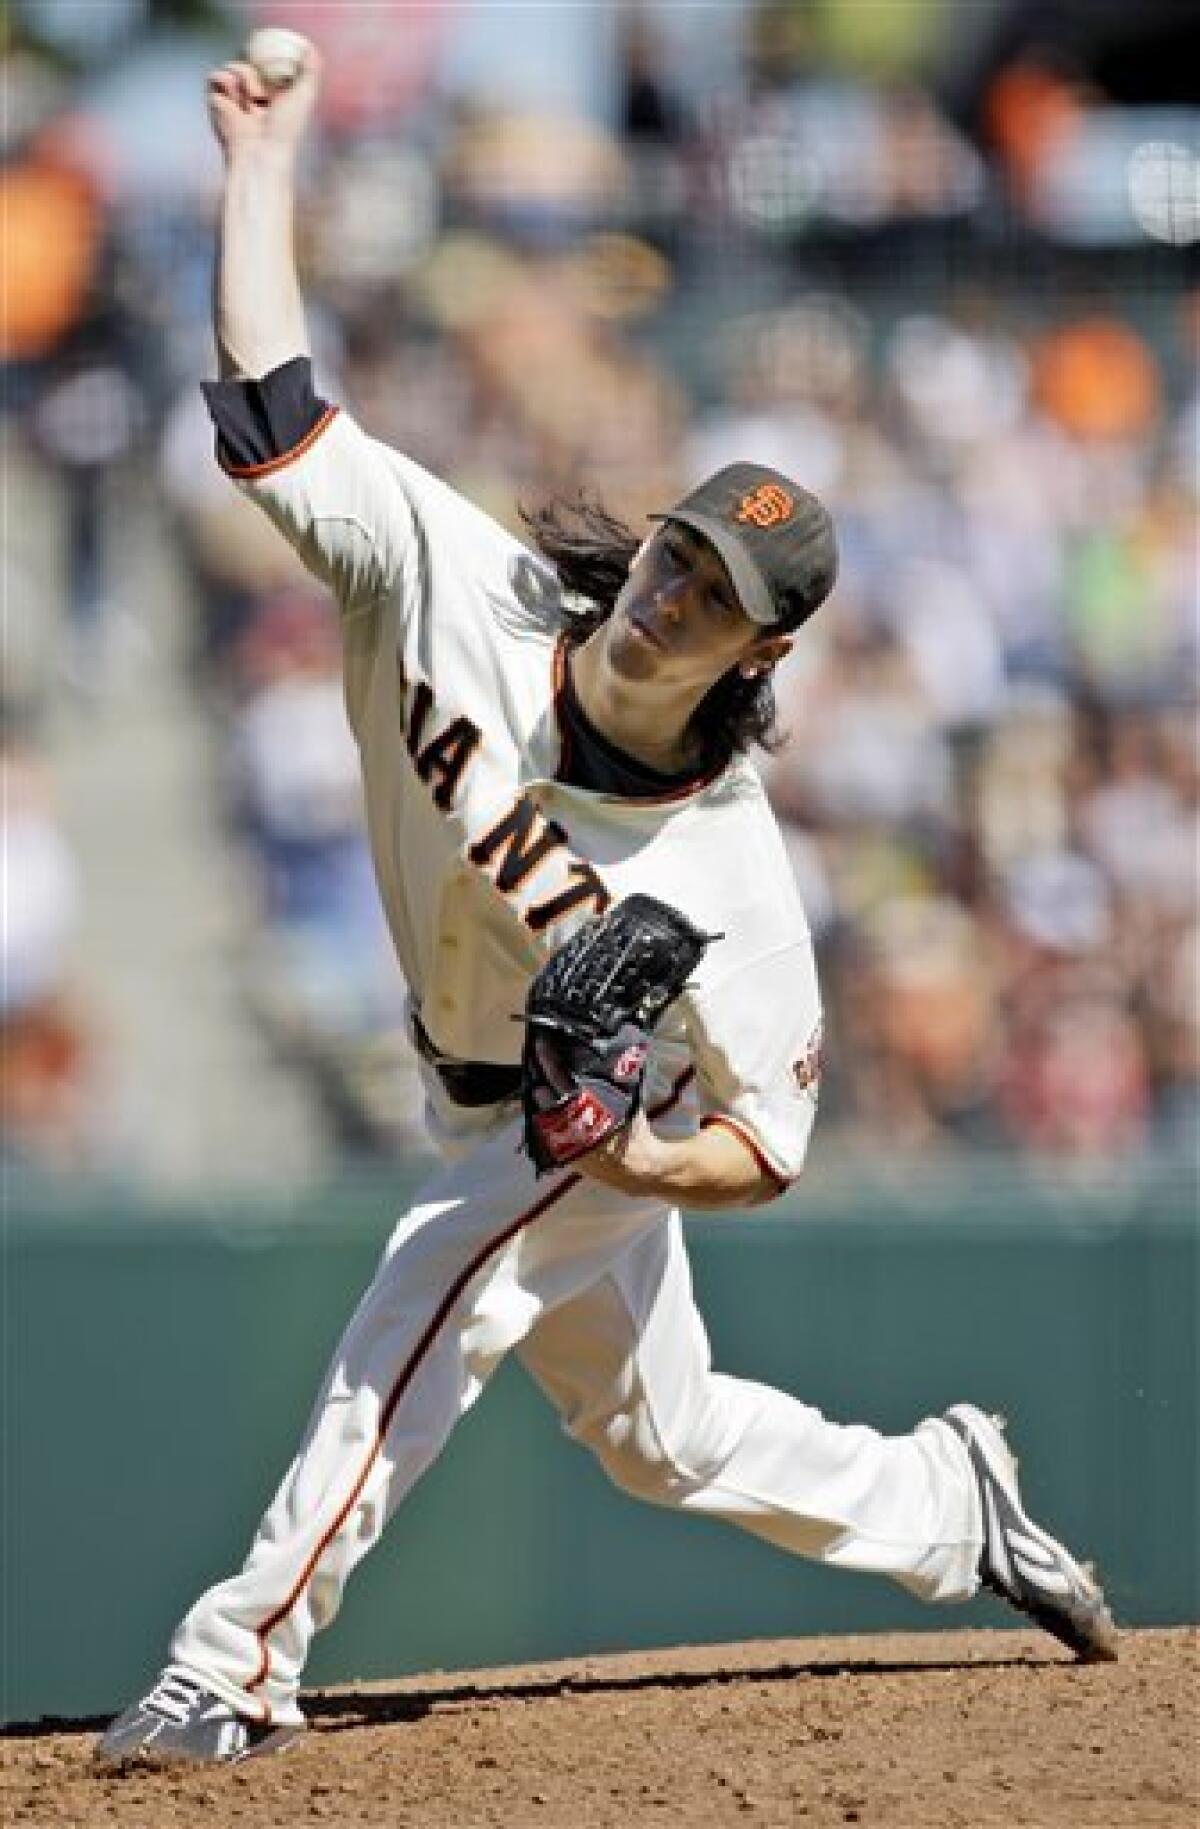 Did Tim Lincecum pitch his last game for the Giants?